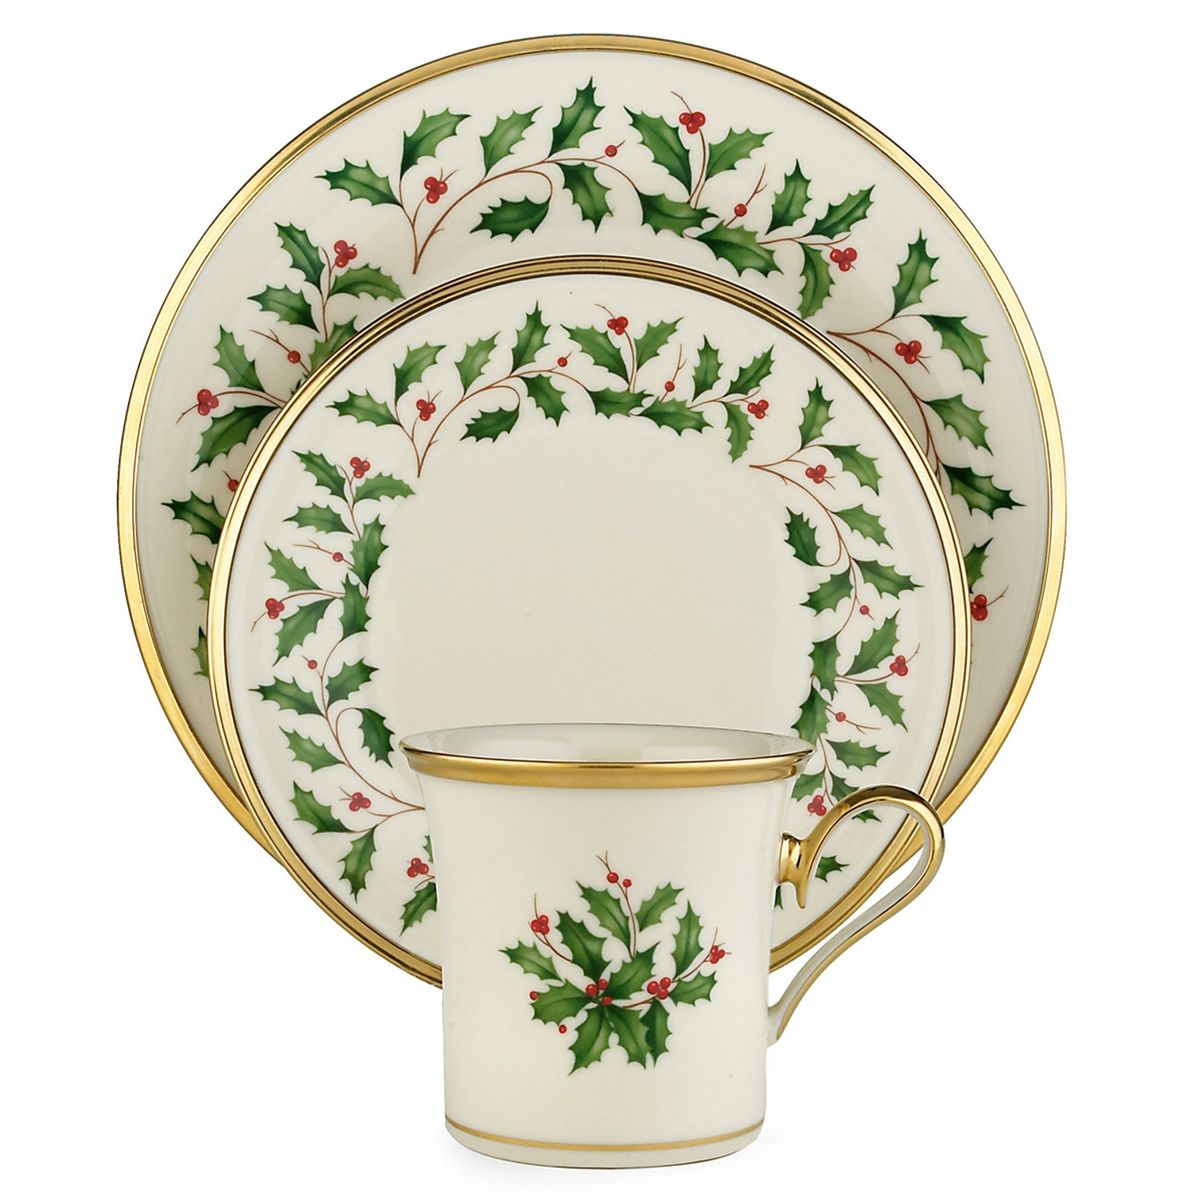 Best-Rated Christmas Holiday Dinnerware Sets On Sale - Reviews And Ratings | A Listly List